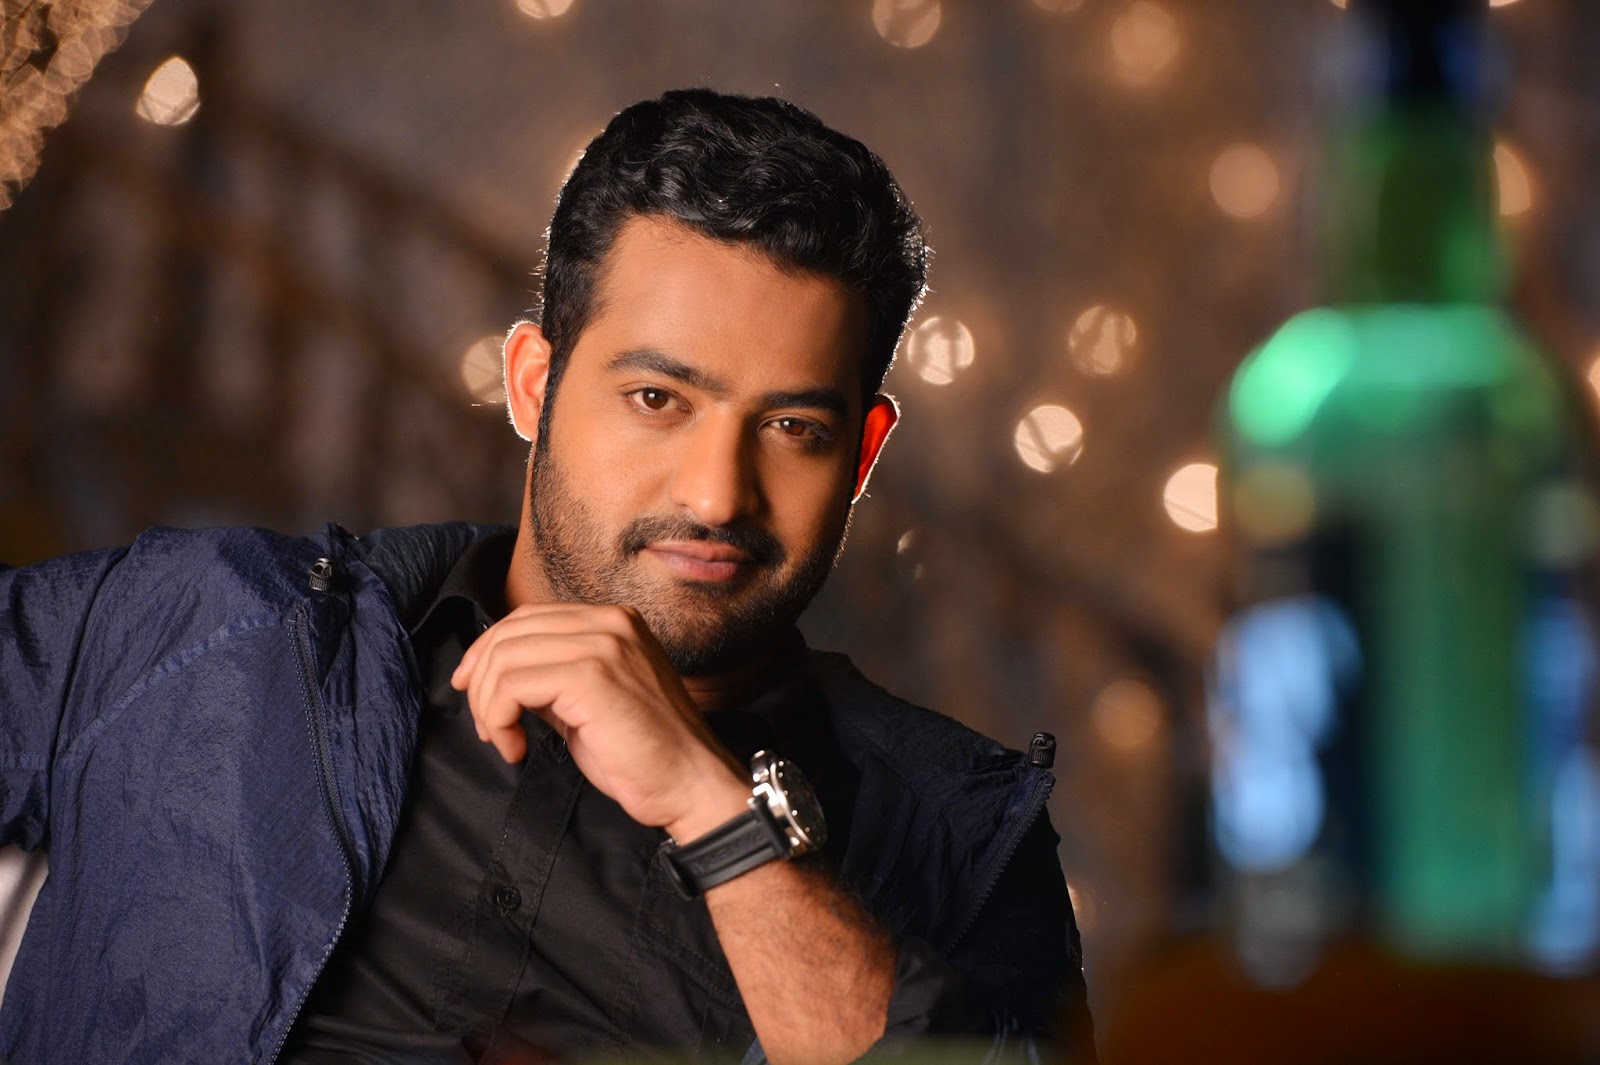 Ultimate Compilation of Jr NTR HD Images - Over 999+ Stunning ...